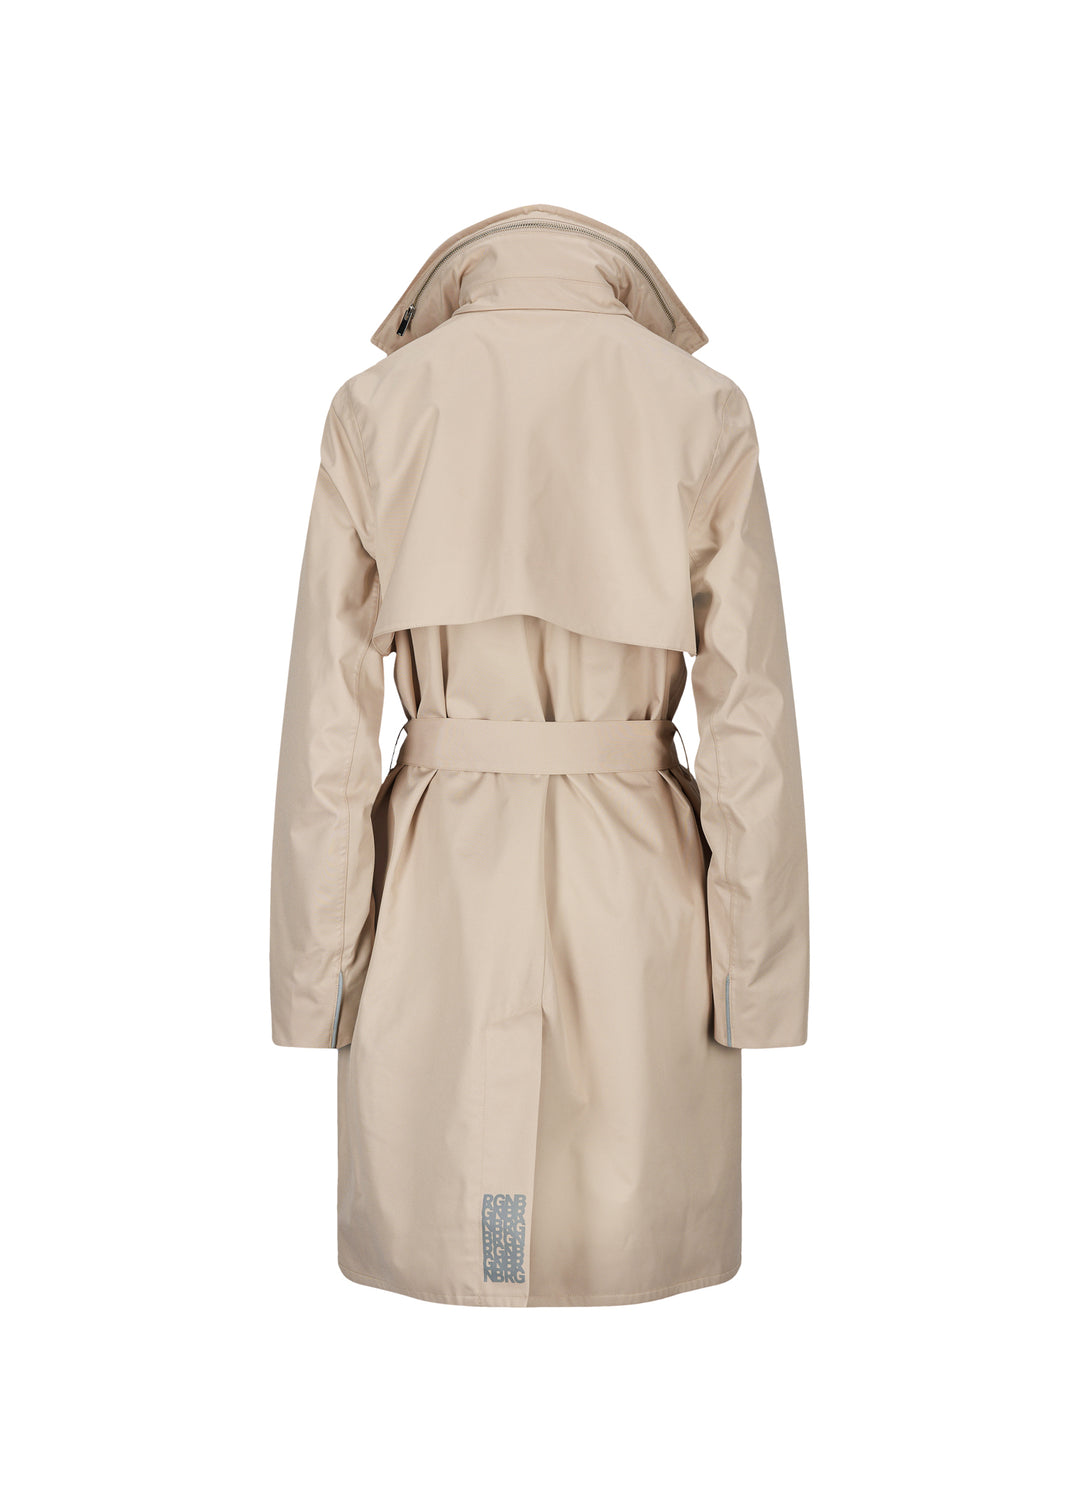 BRGN by Lunde & Gaundal Yr Coat Coats 135 Sand